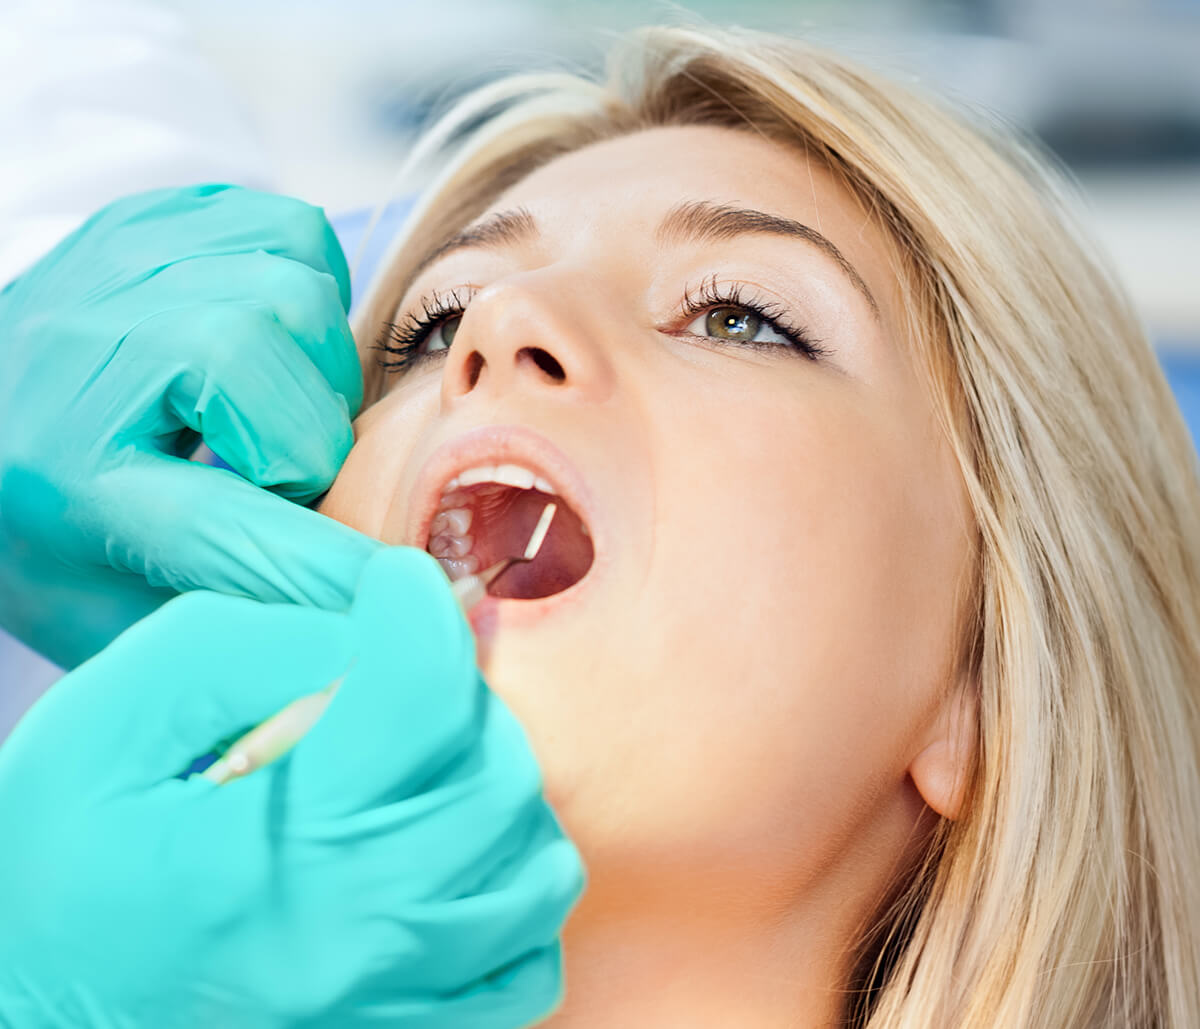 Root Canal Treatment Process in Houston Area